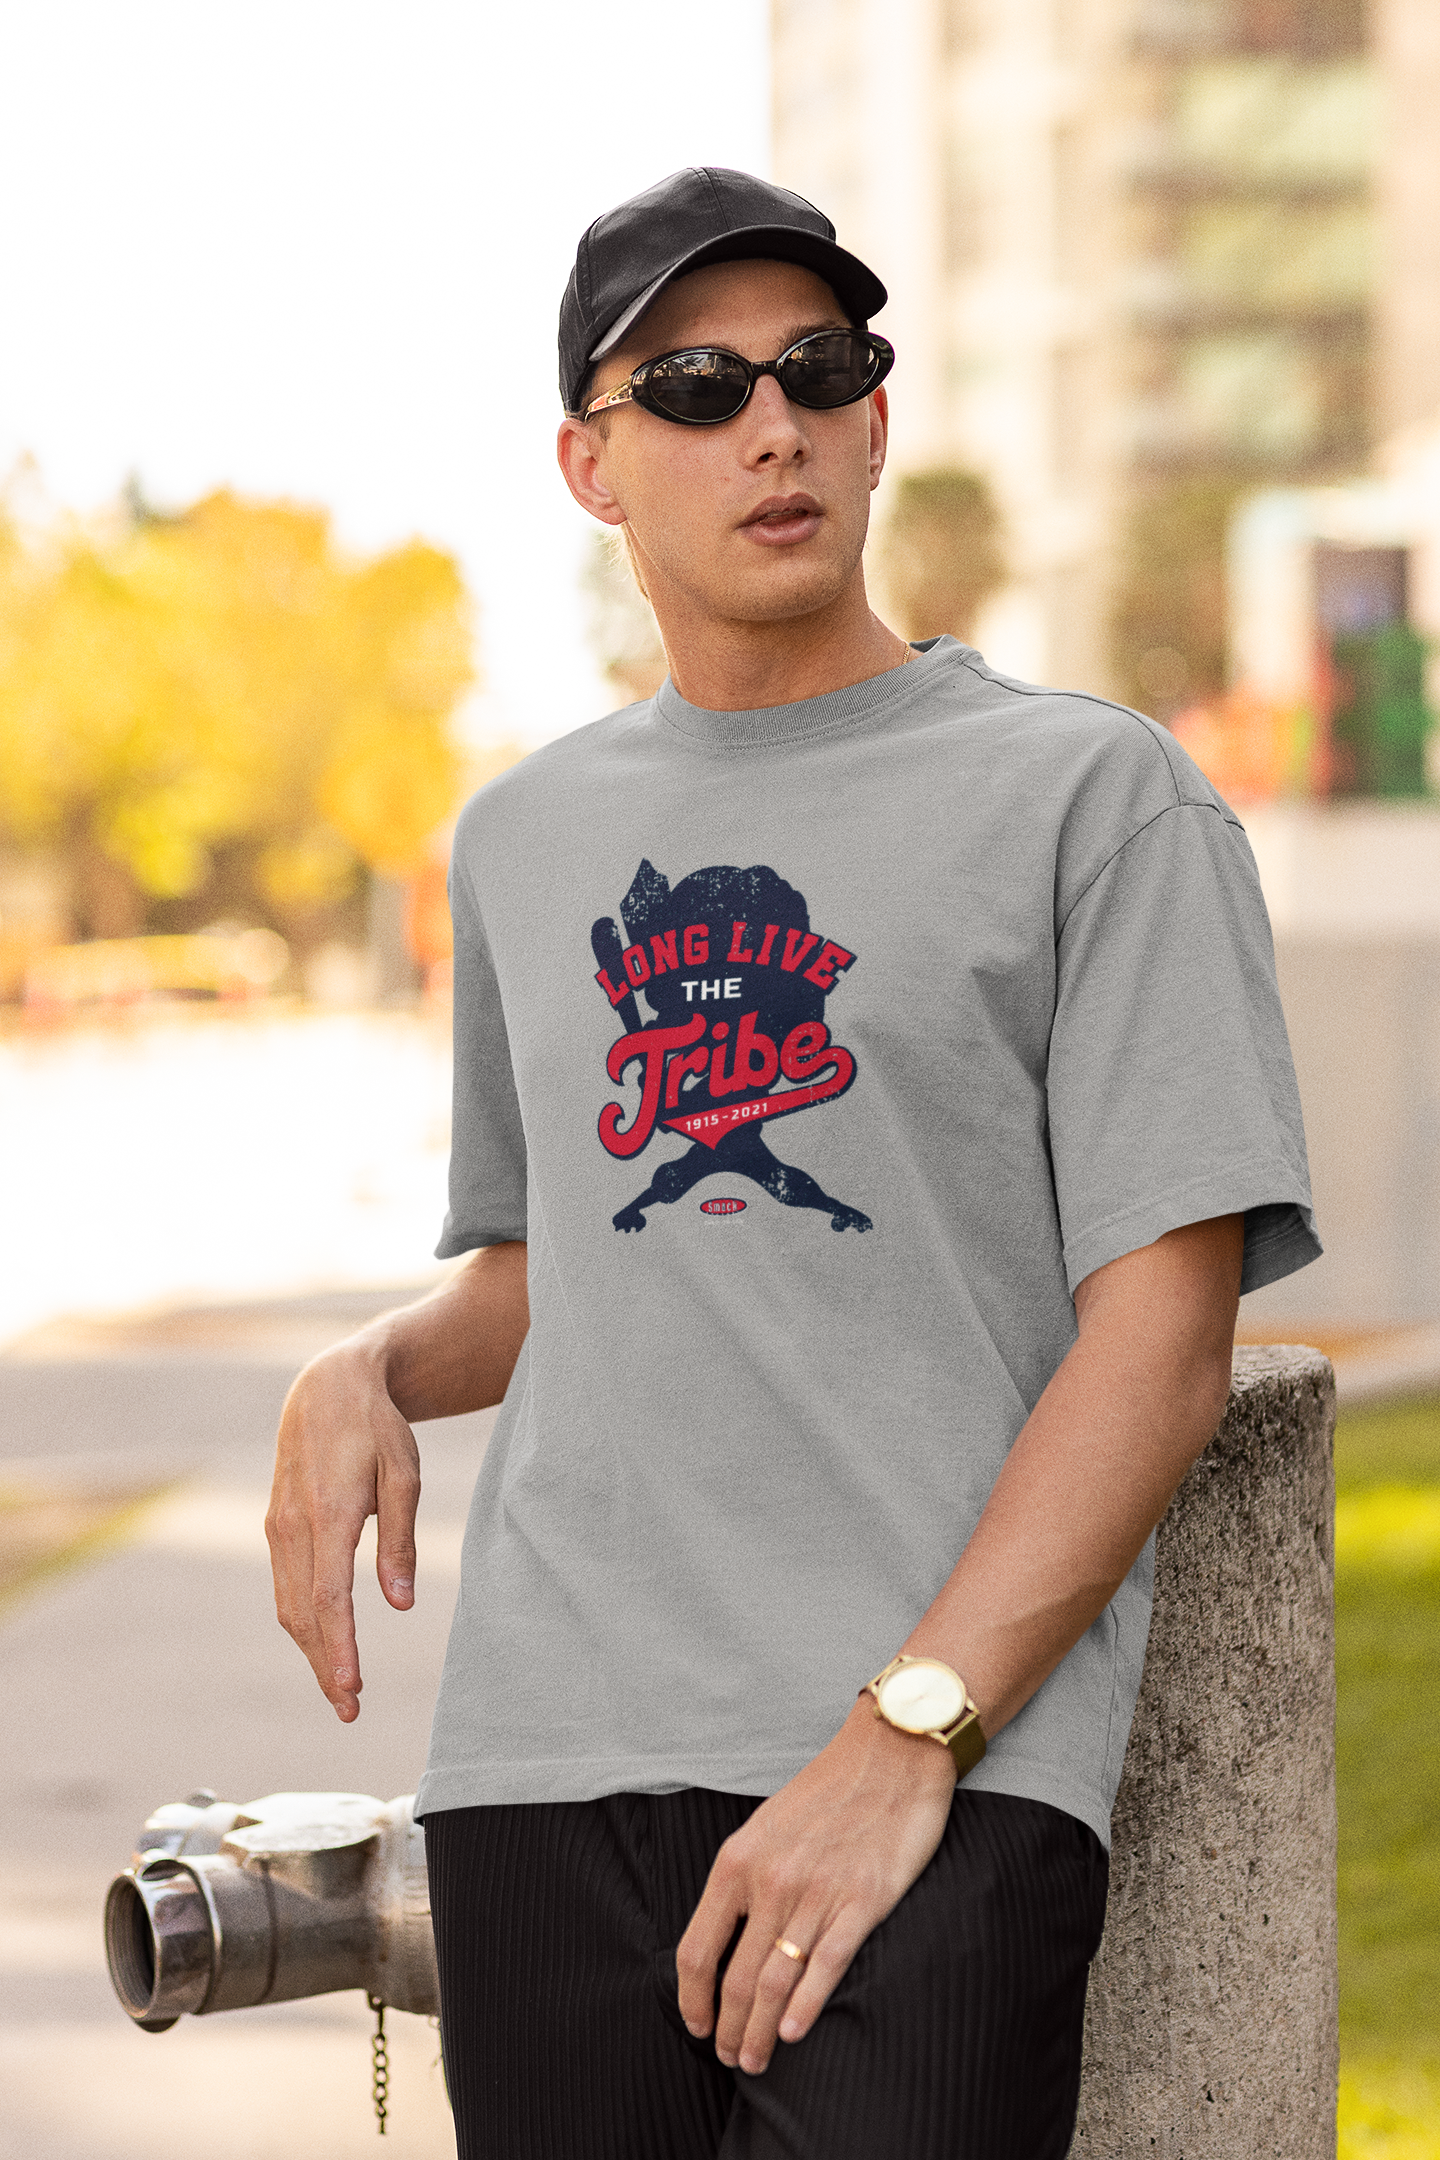 Cleveland Indians T-shirt - T-shirts Low Price